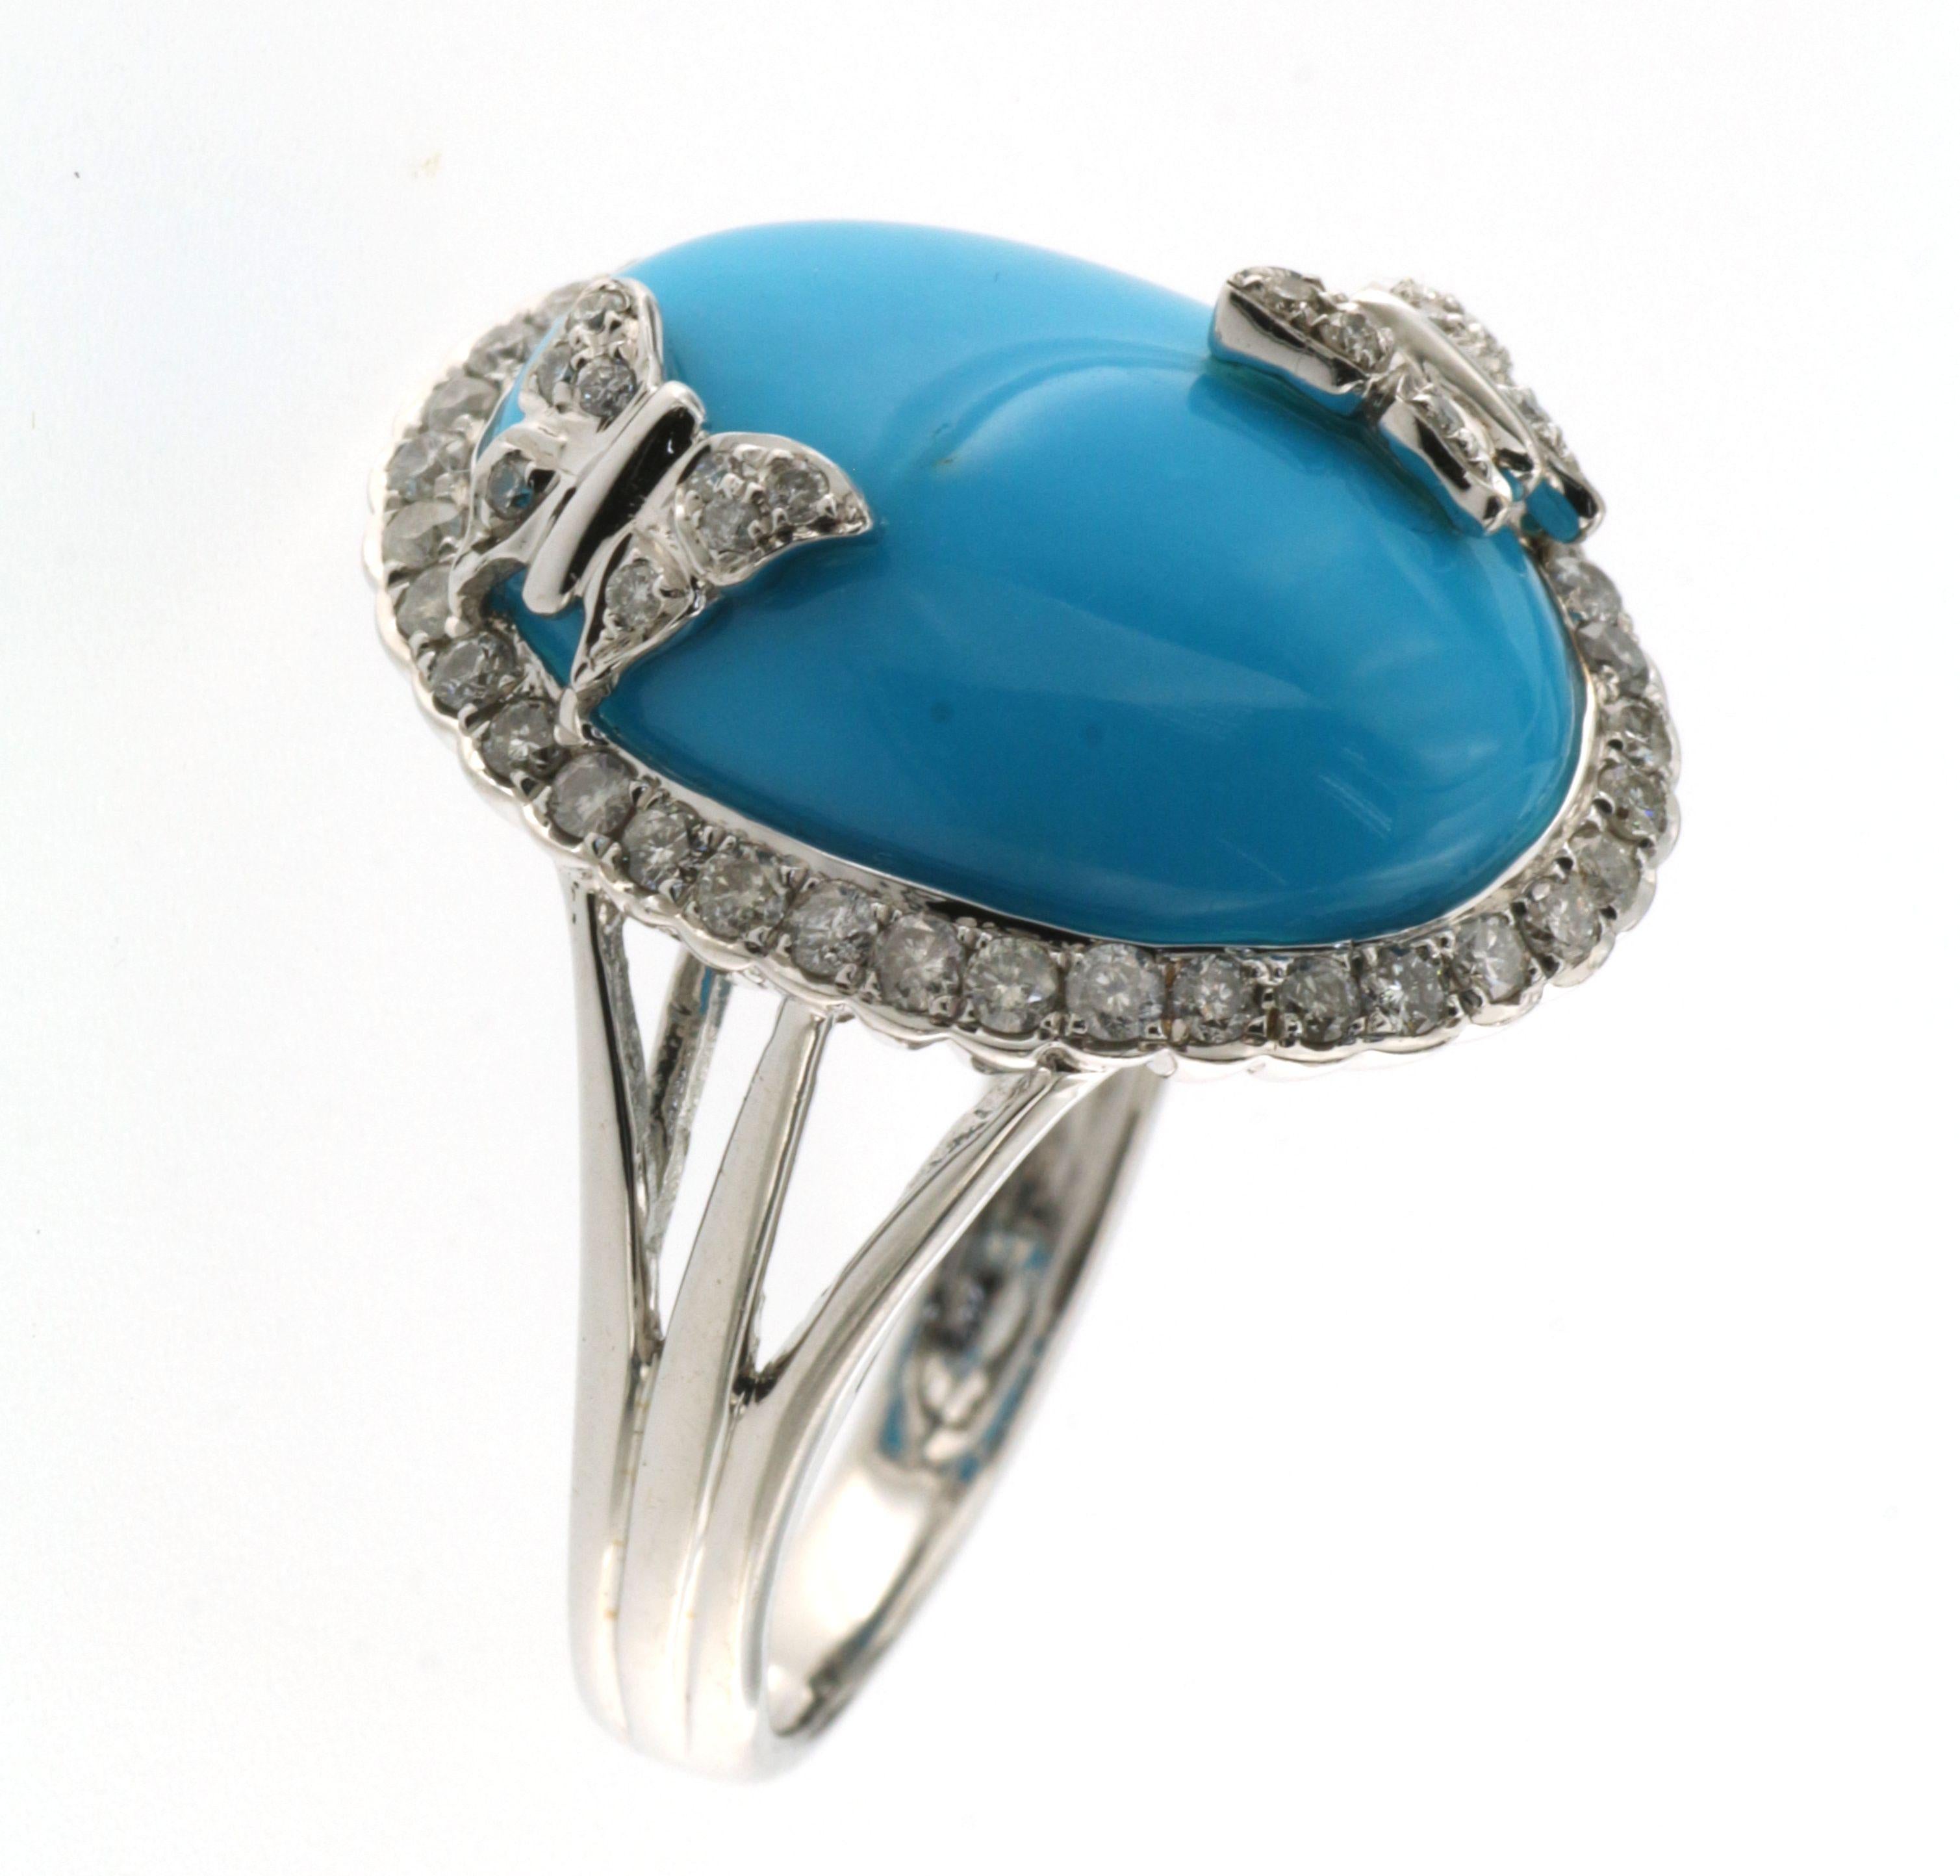 Contemporary Turquoise Diamond Cocktail Ring in 18 Karat White Gold